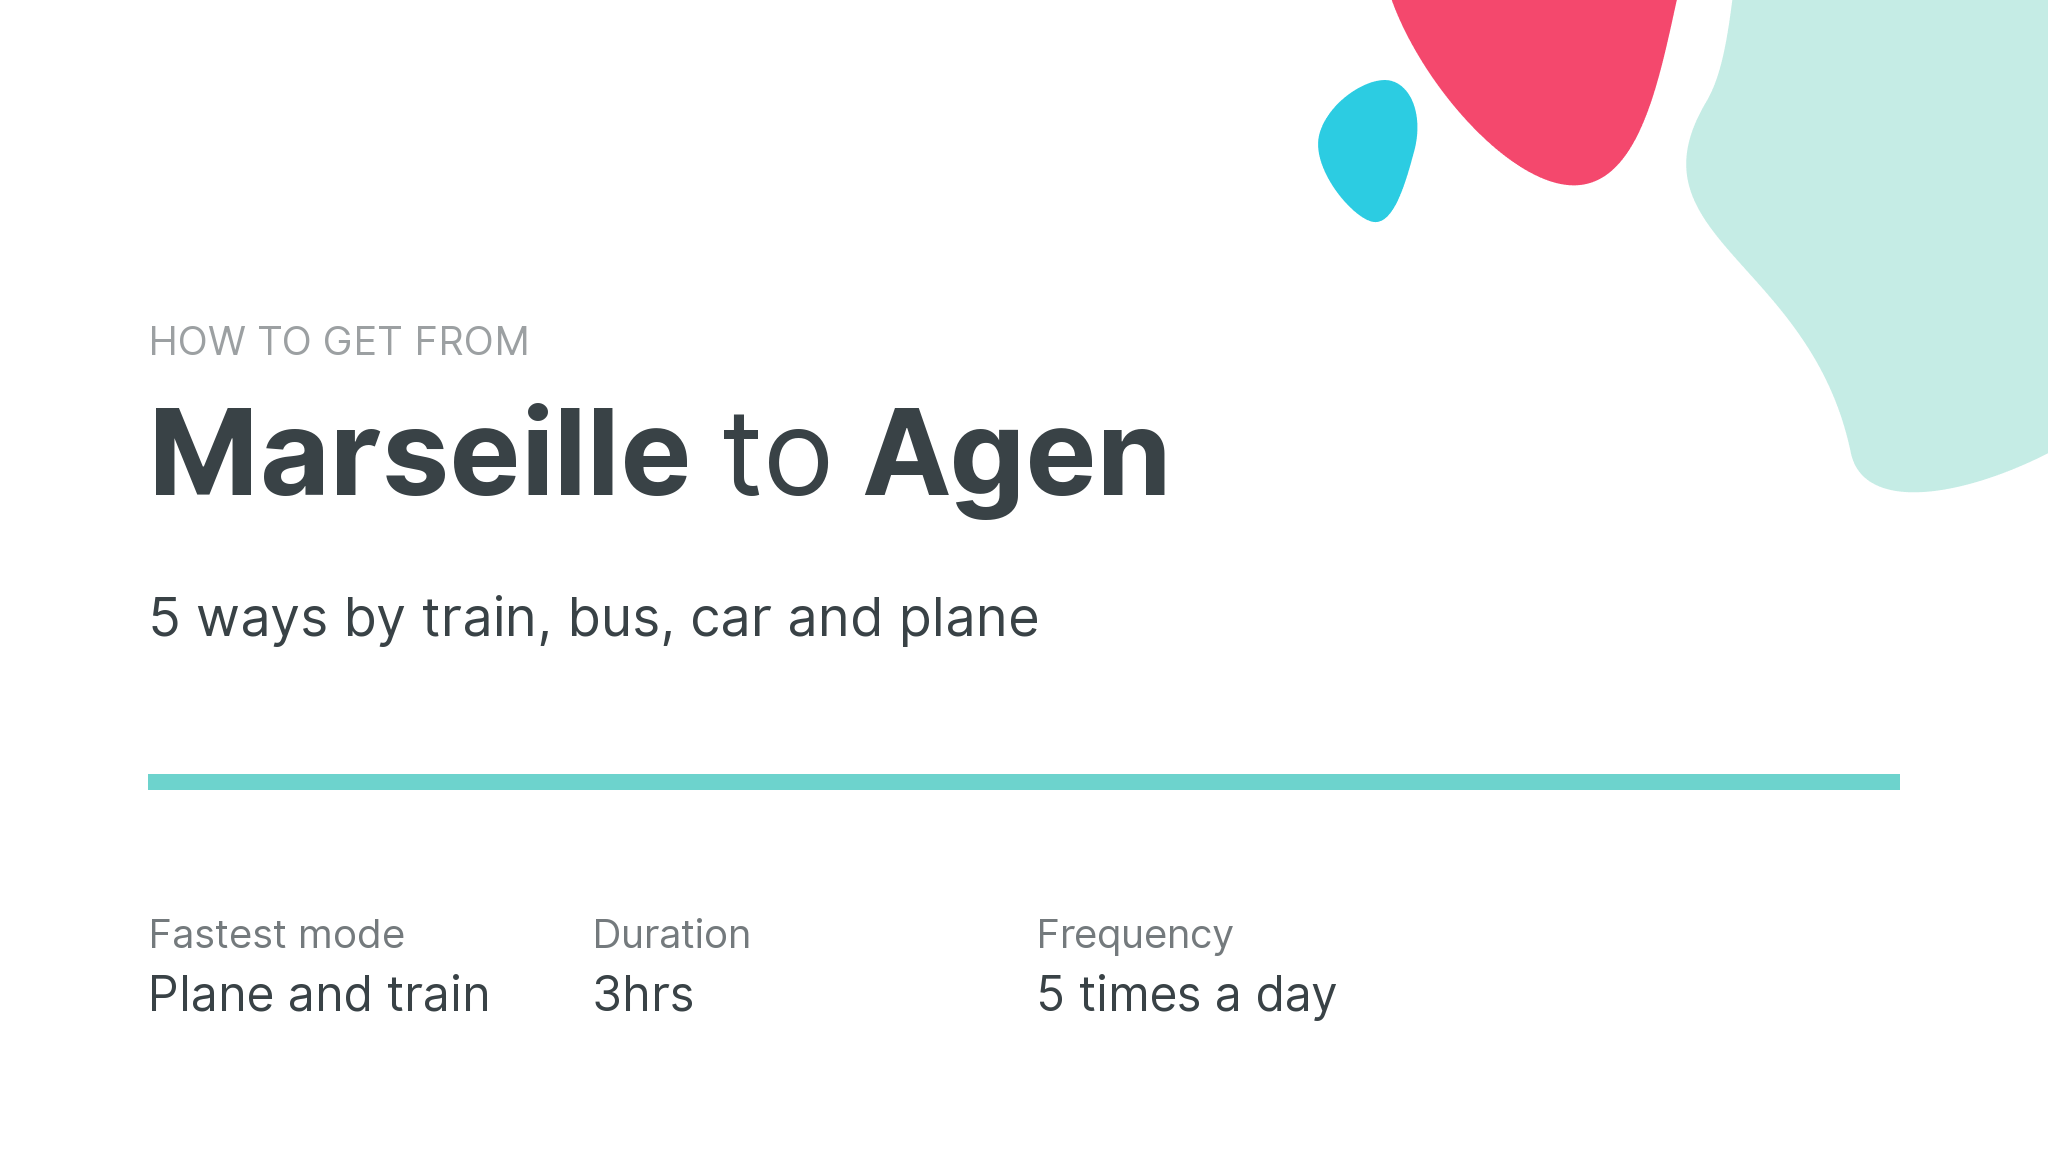 How do I get from Marseille to Agen